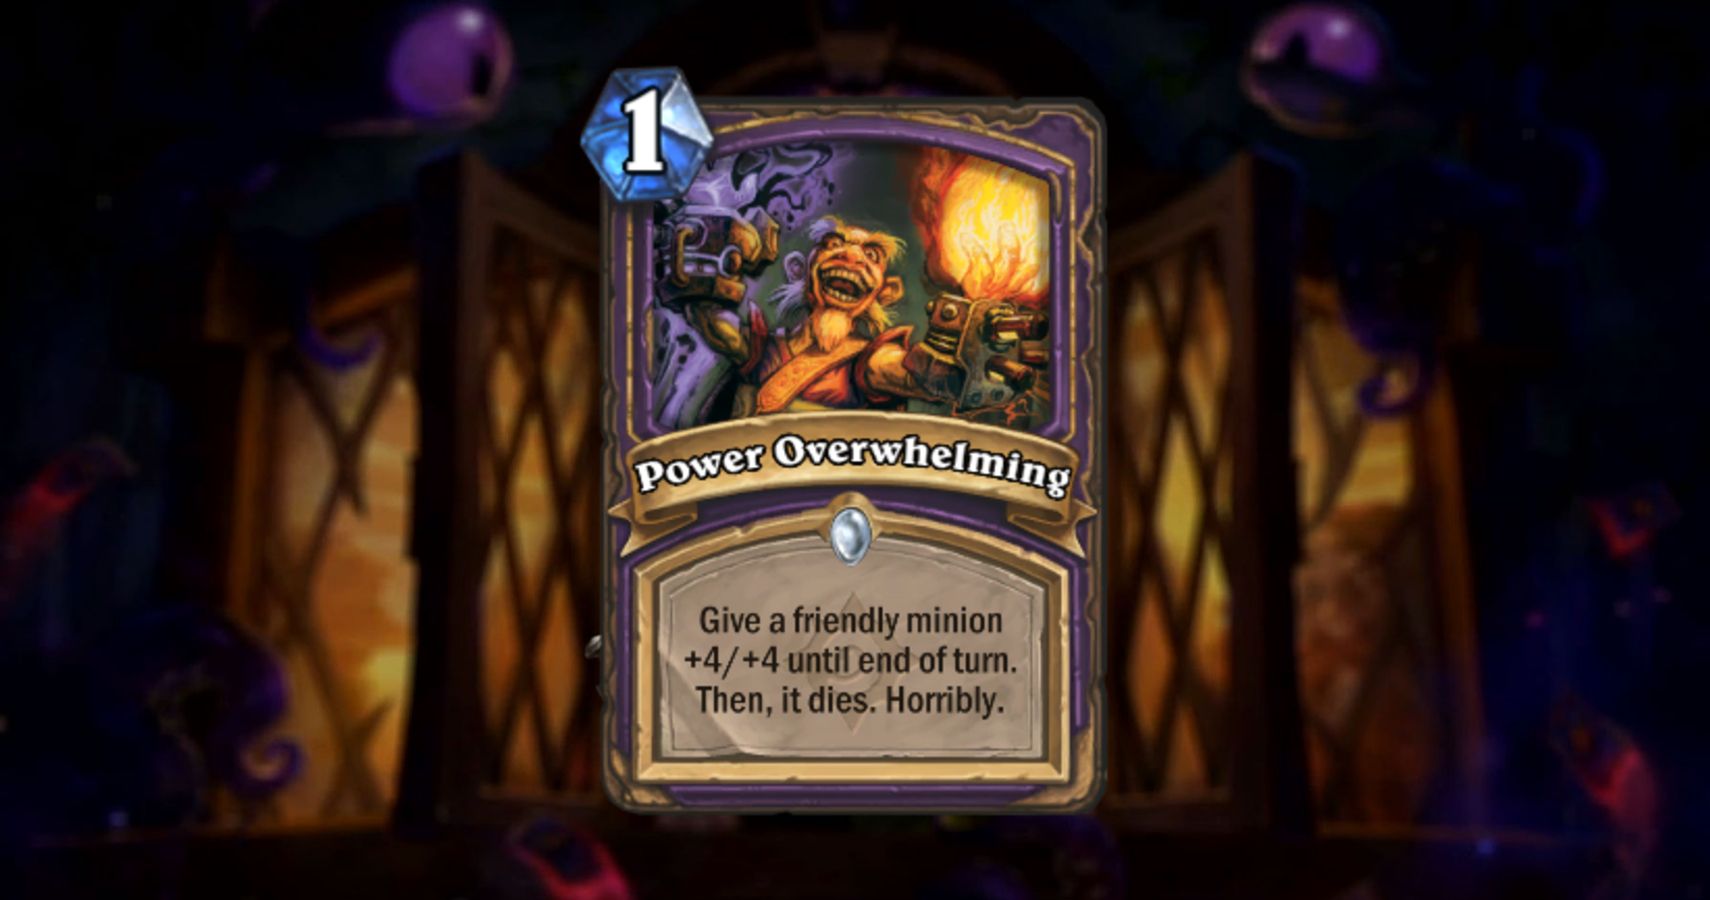 Pro Hearthstone Player Maxime Pelletier Lays Out Exactly How The Game Has Worsened Over Time